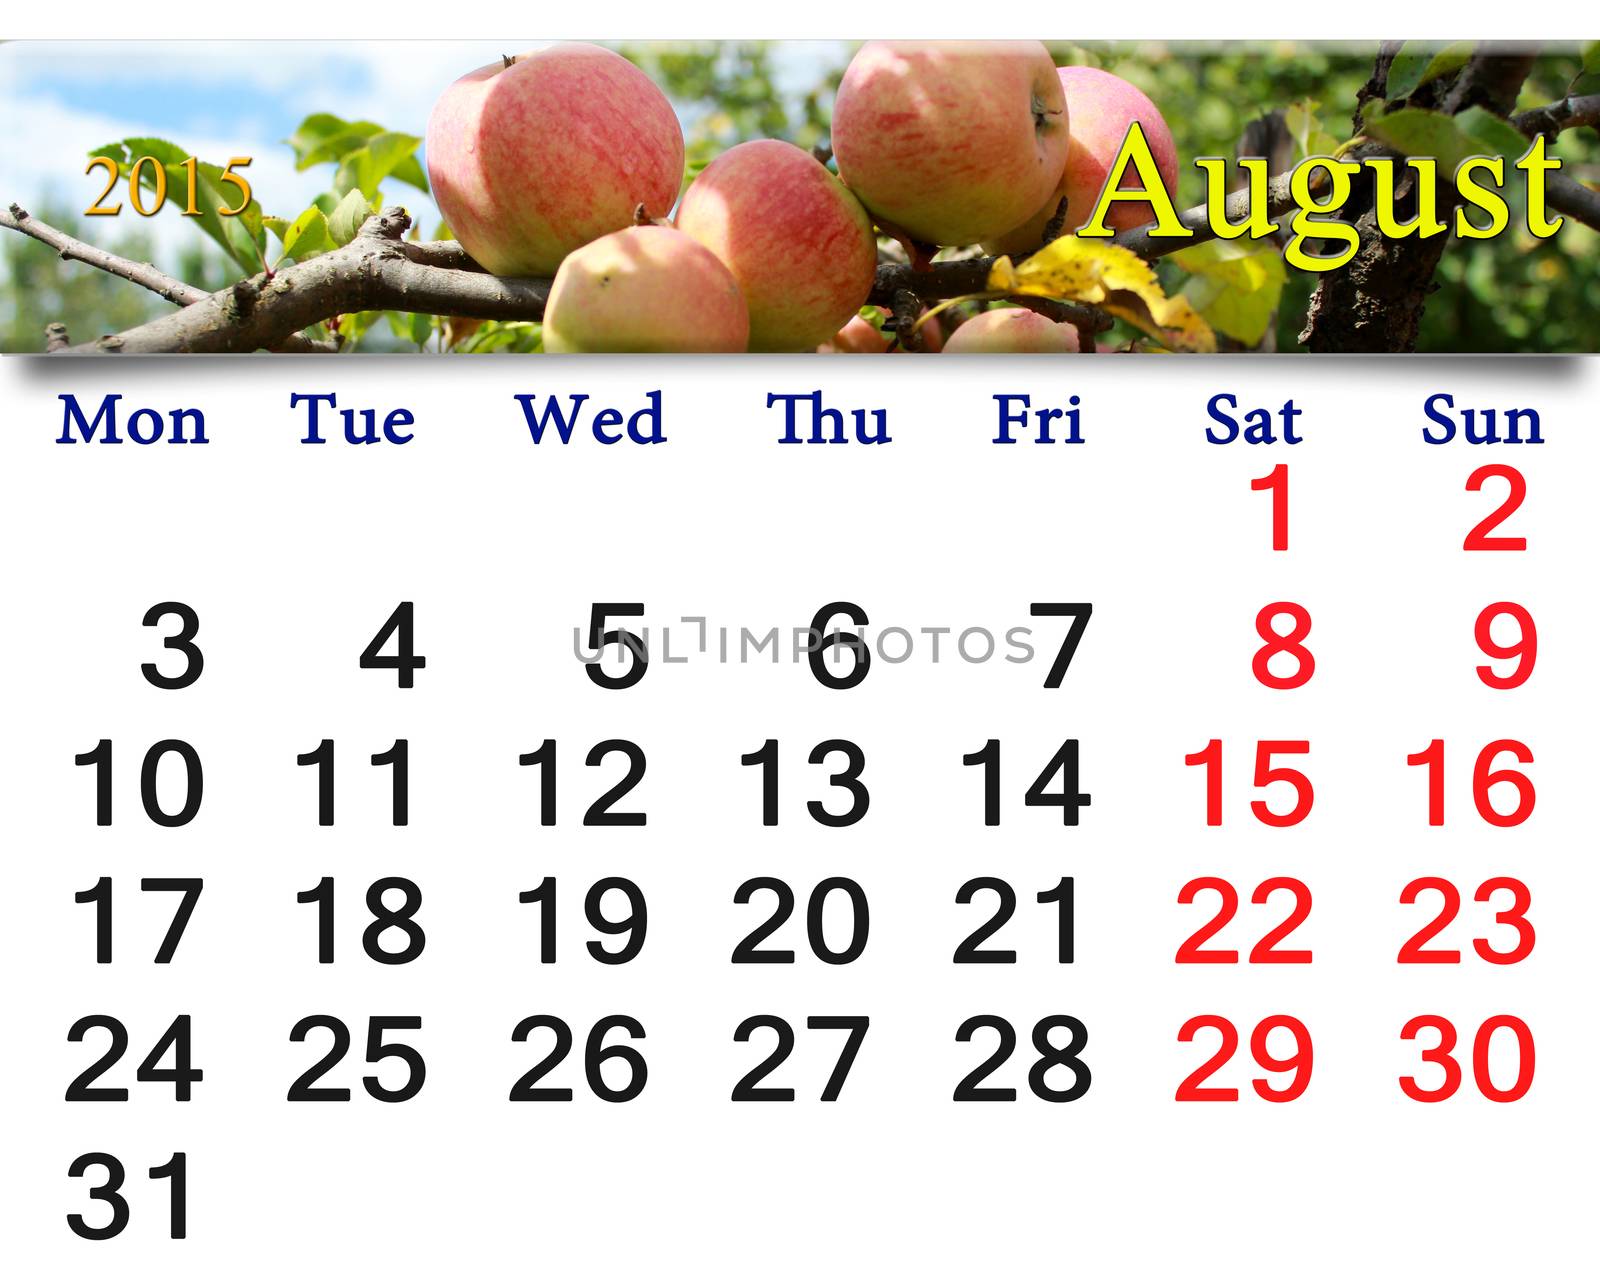 beautiful calendar for the August of 2015 year with image of apples